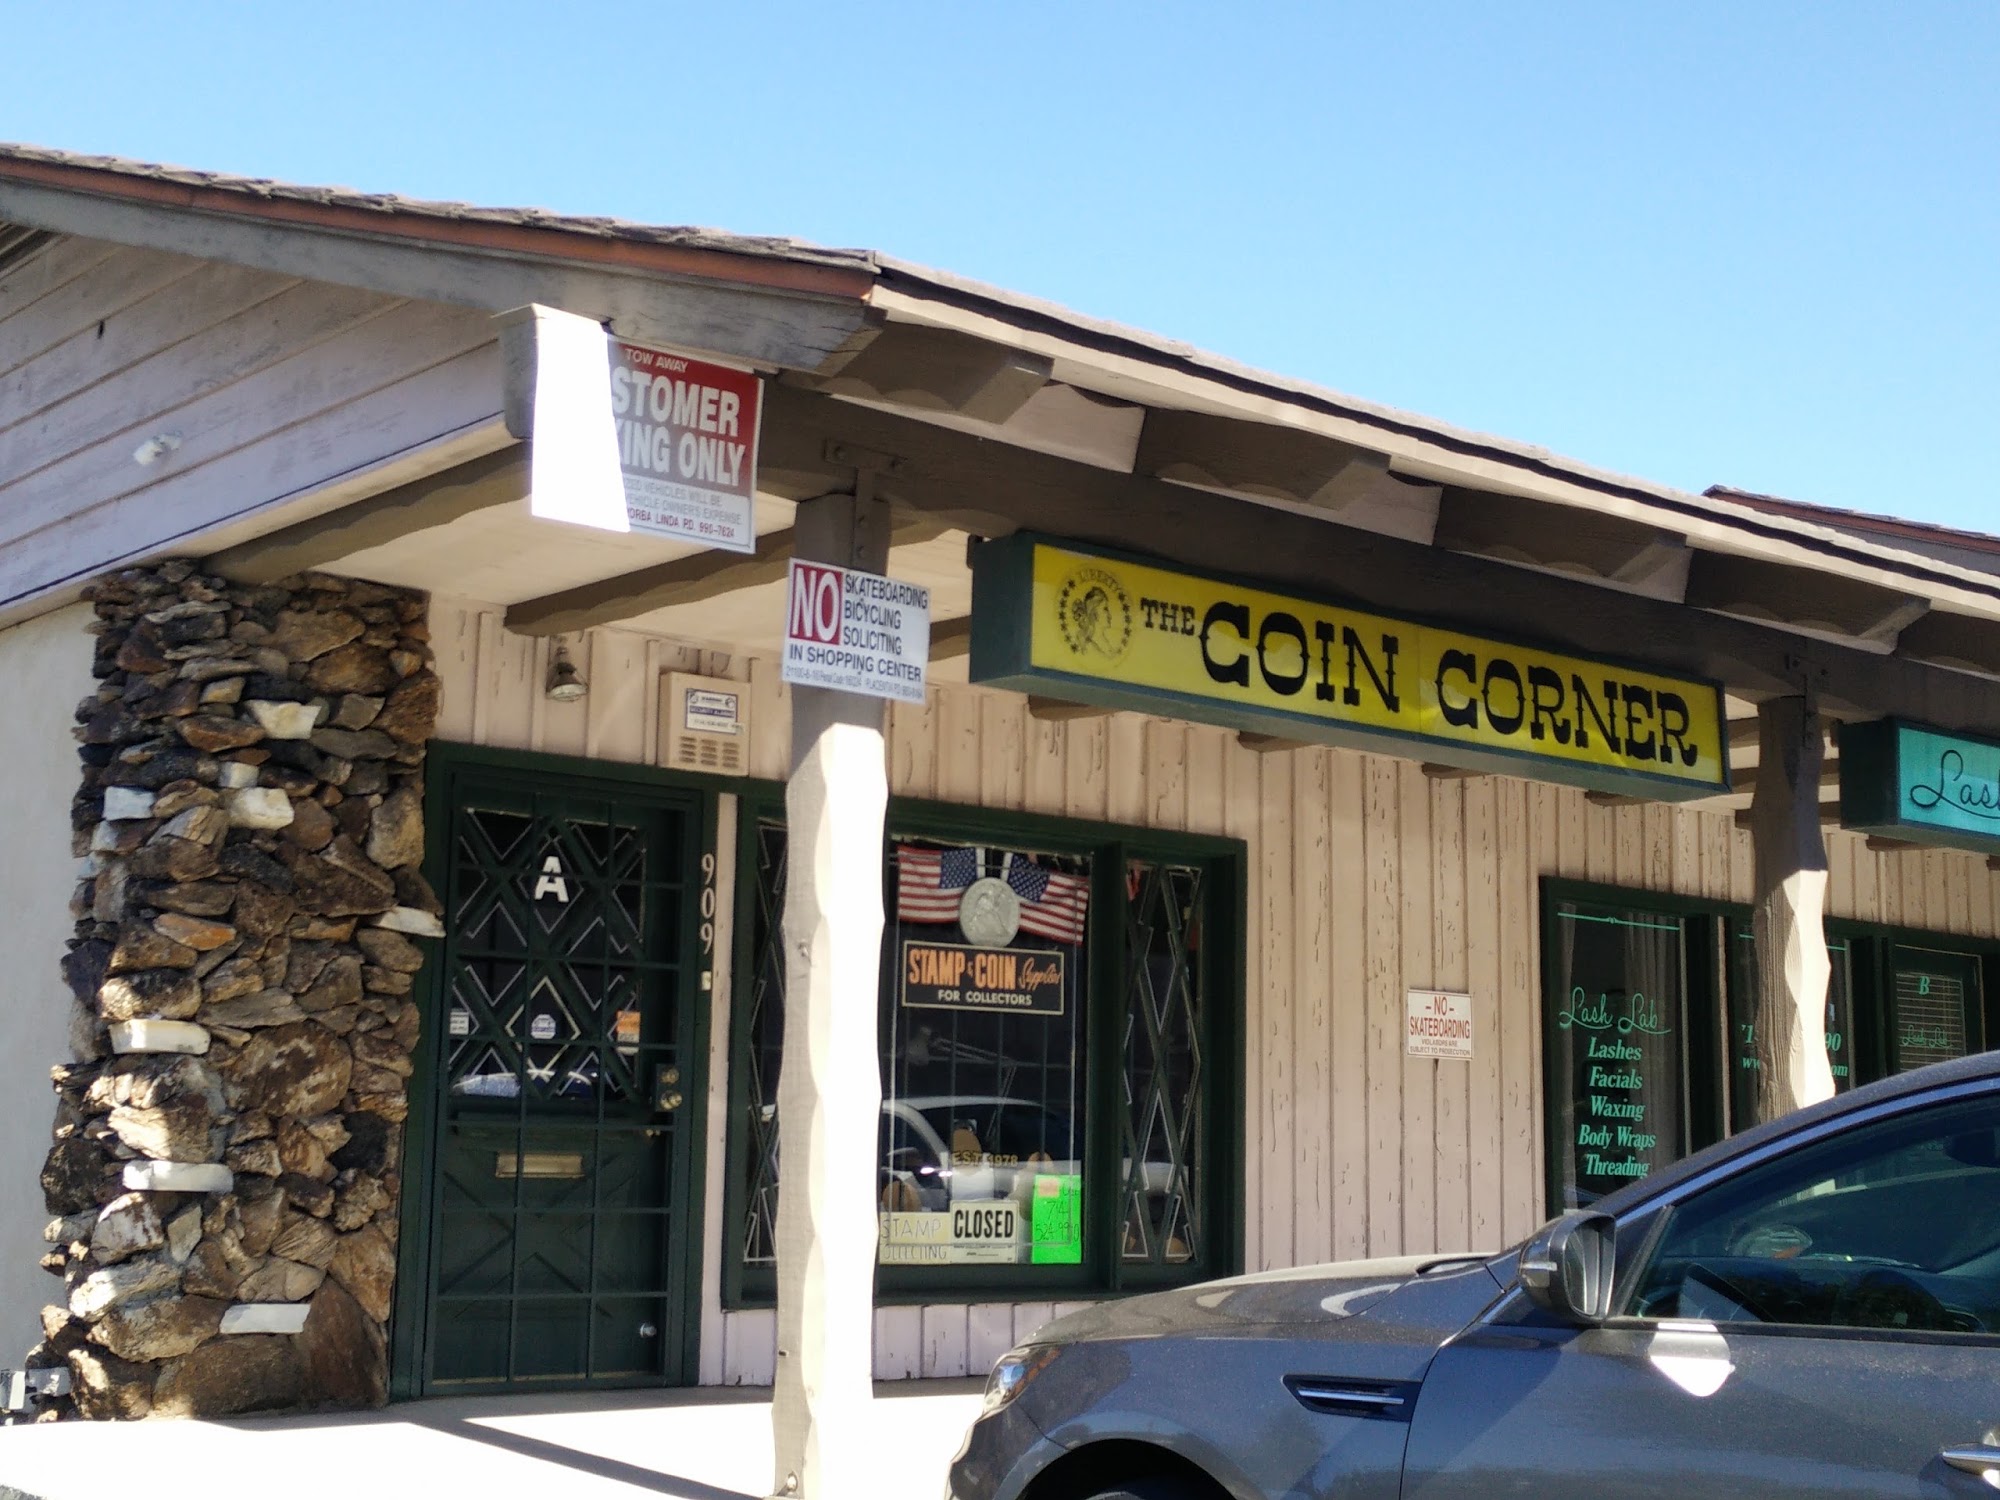 The Coin Corner